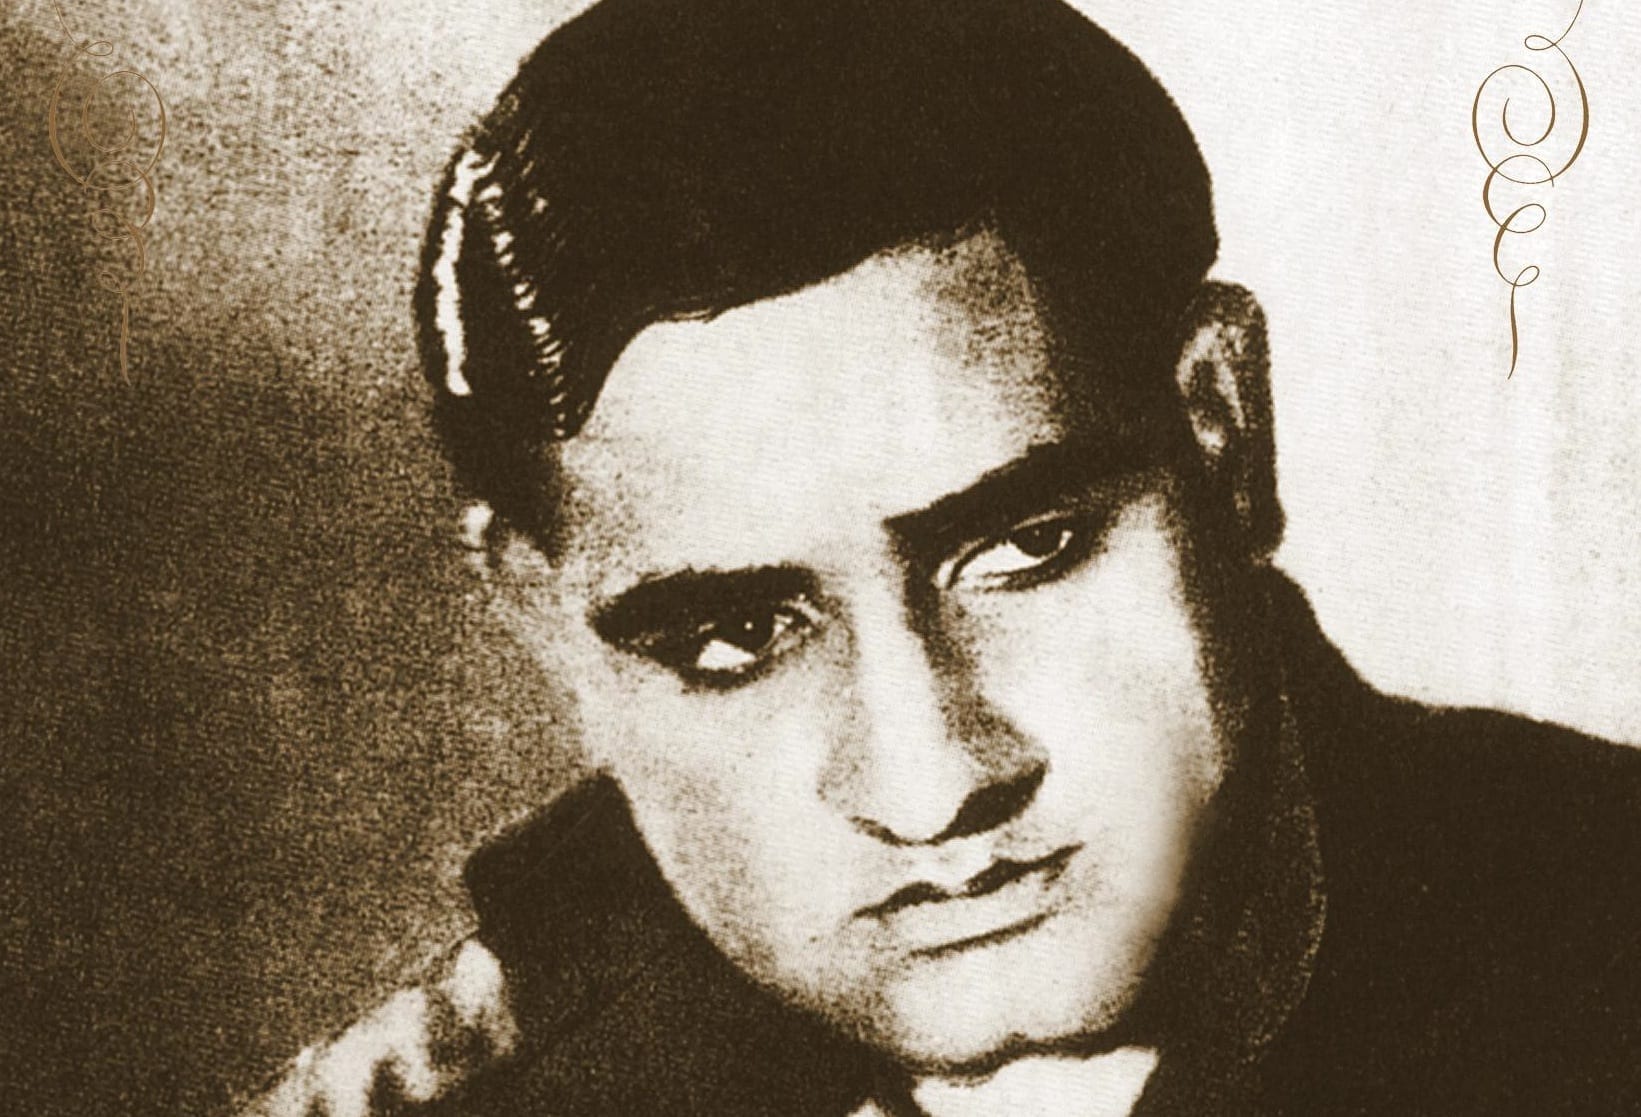                               Babul Mora – Thumri in Raag Bhairavi sung by KL Saigal and others                             
                              